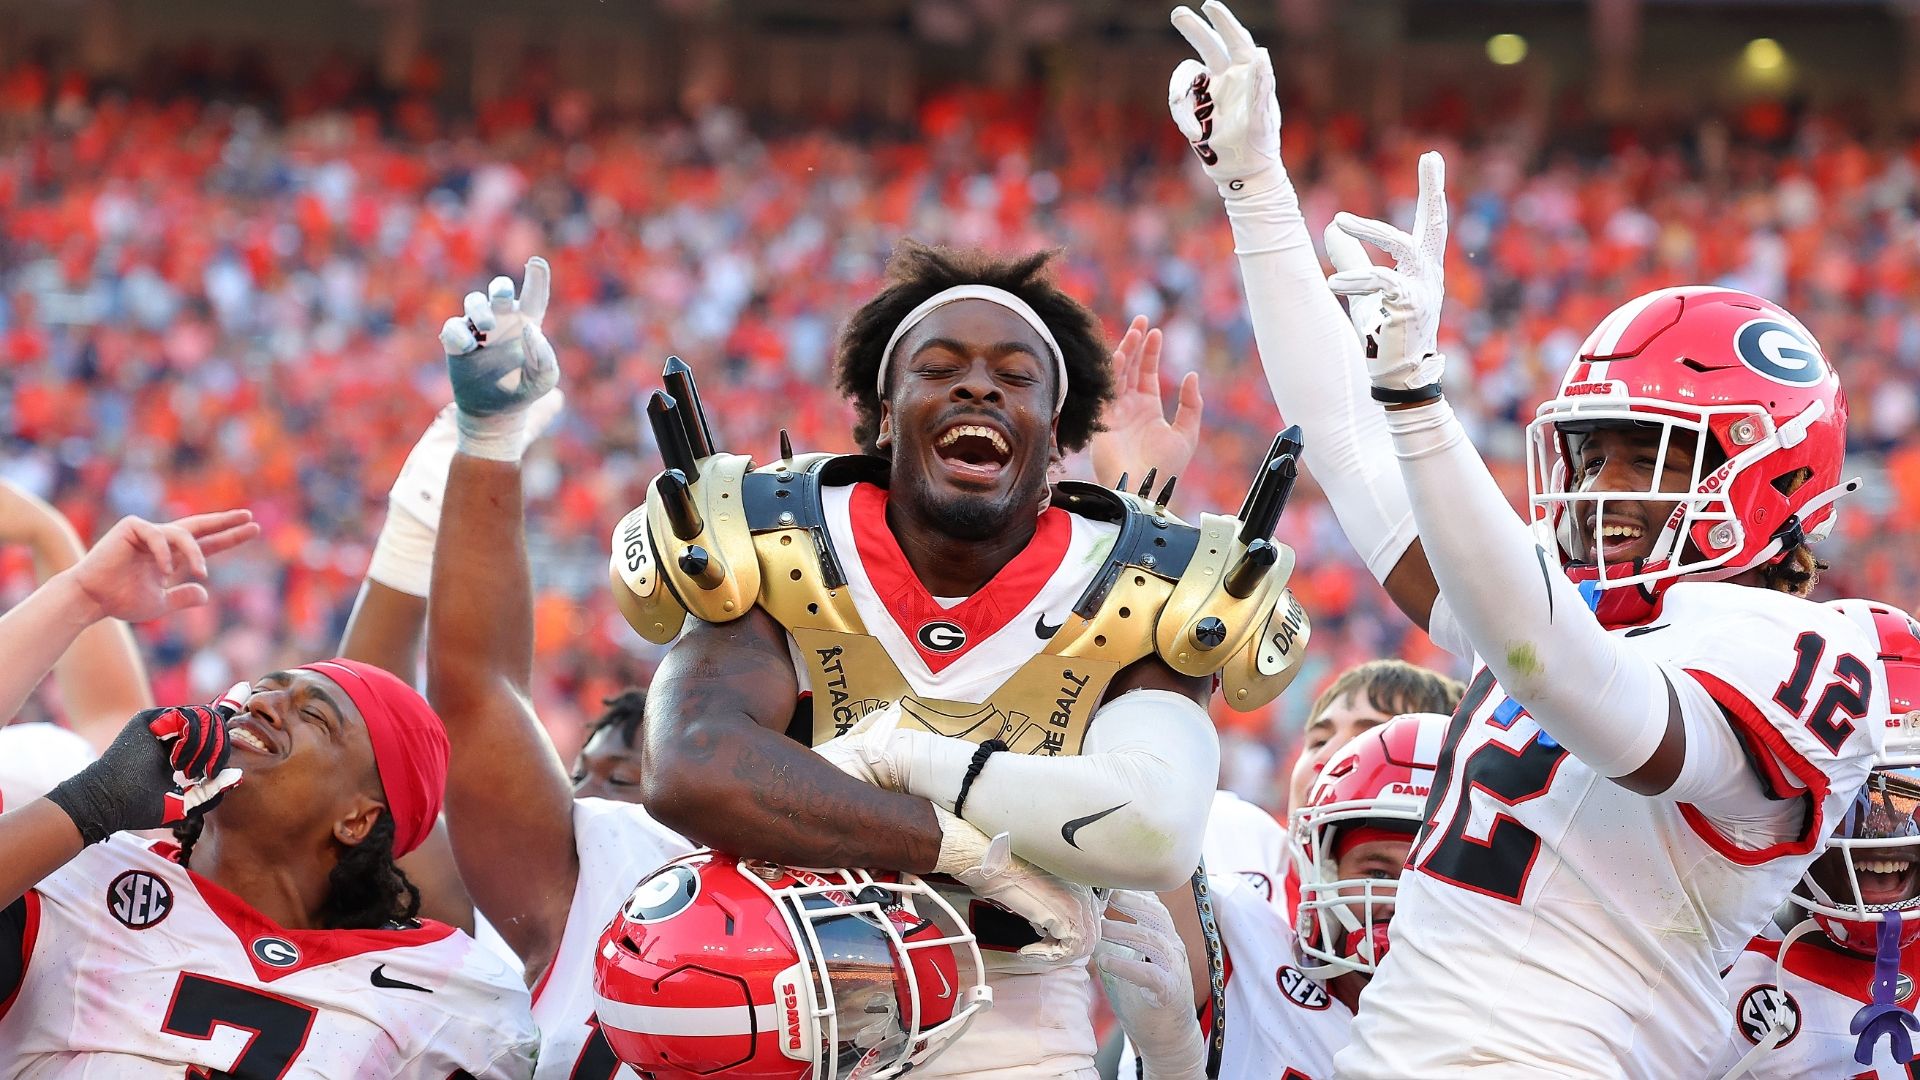 SEC Now crew reacts to Georgia's CFP ranking placement